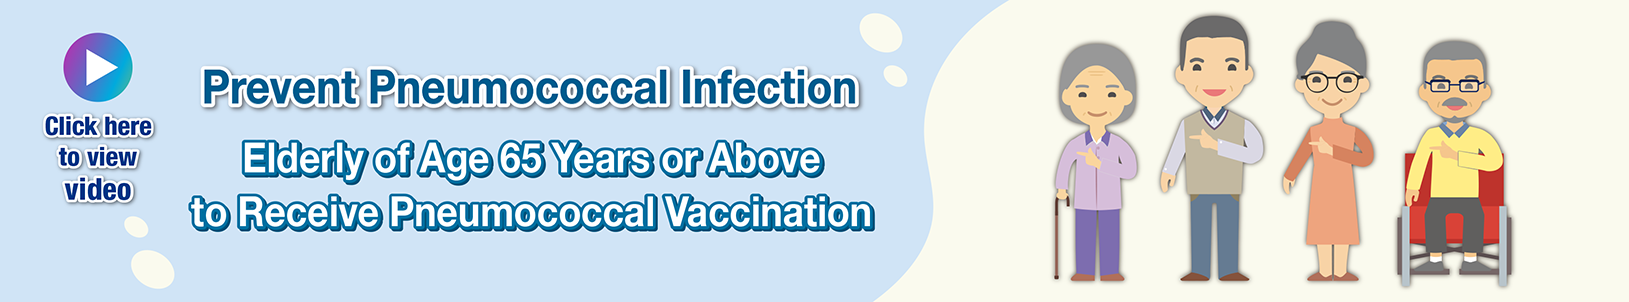 Click Here To View Video - Prevention of Pneumococcal Infection: Elderly of Age 65 Years or Above to Receive Pneumococcal Vaccination